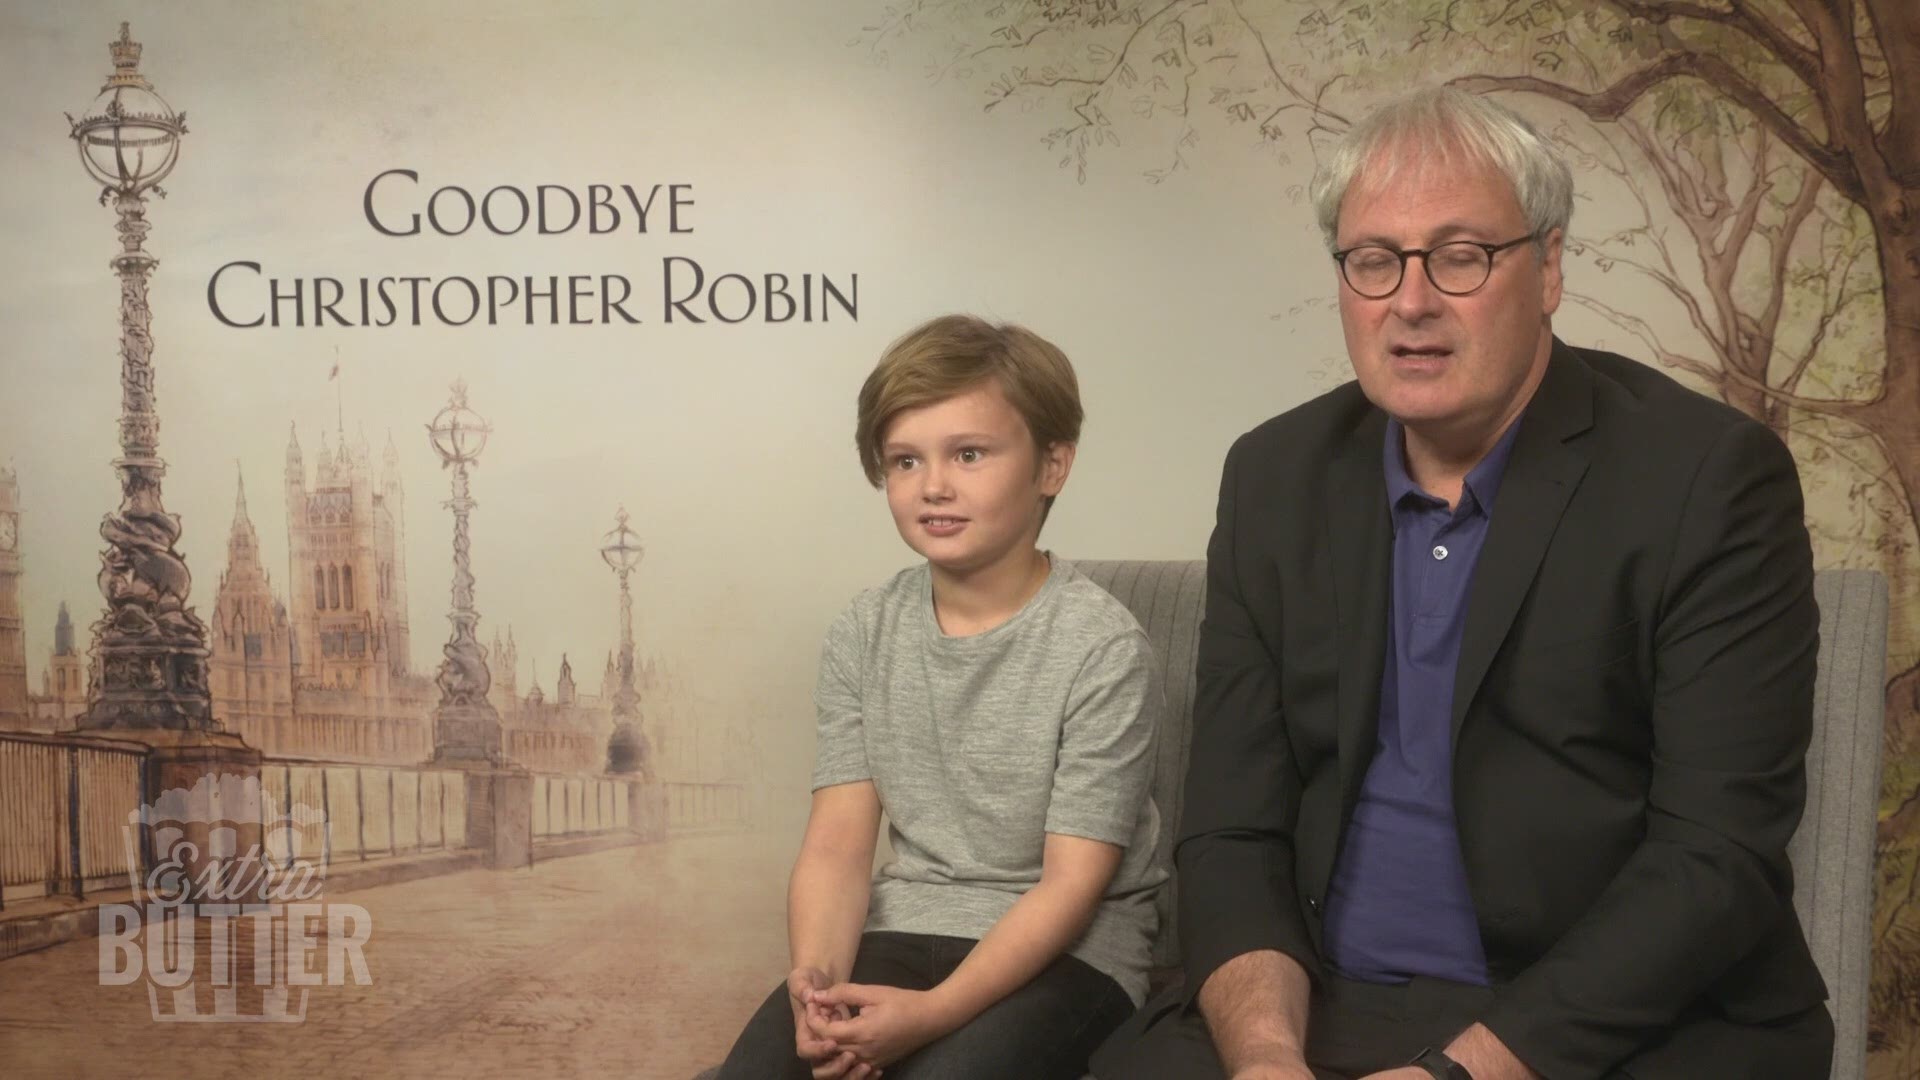 "Goodbye Christopher Robin" gives us a behind-the-scenes look at the life of author A.A. Milne and the creation of the Winnie the Pooh stories inspired by his son C.R. Milne. (Travel and accommodation costs paid by Fox Searchlight Pictures)